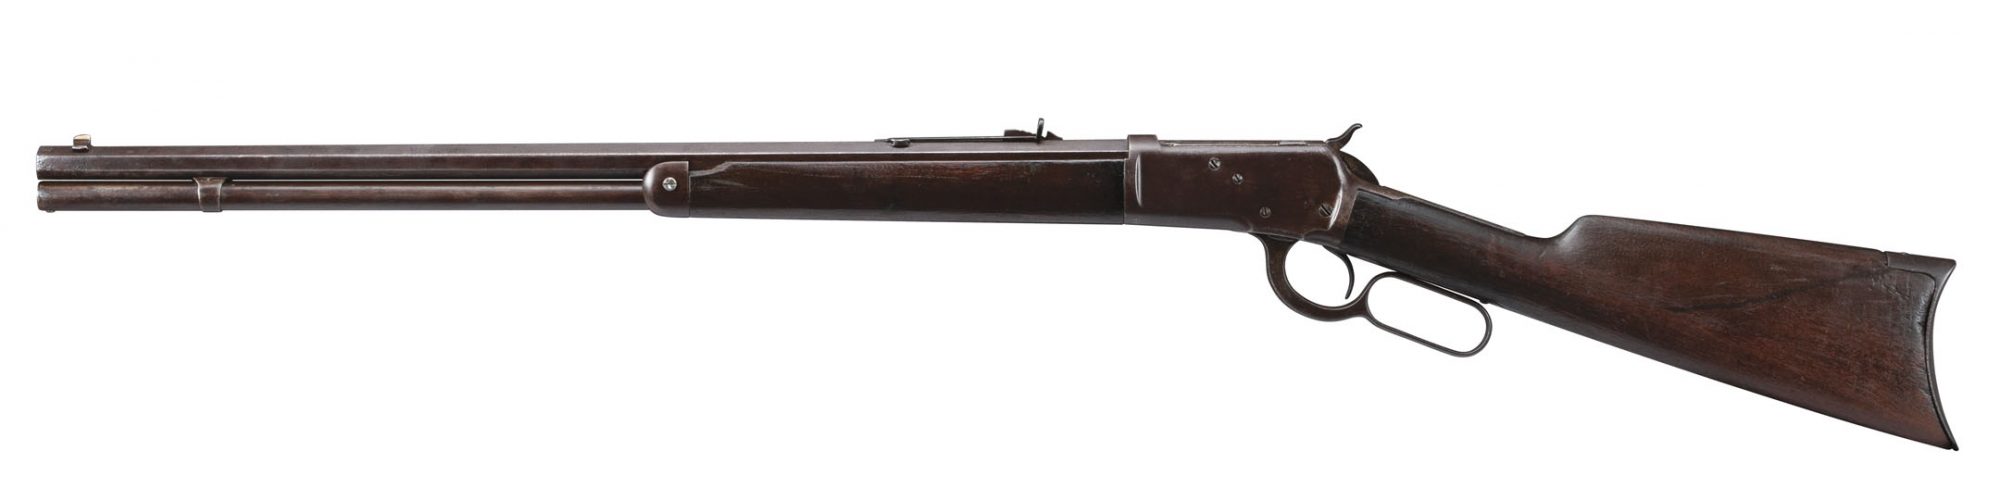 Photo of a Winchester Model 1892 from 1900 before restoration in 2019 by Turnbull Restoration Co. of Bloomfield, NY